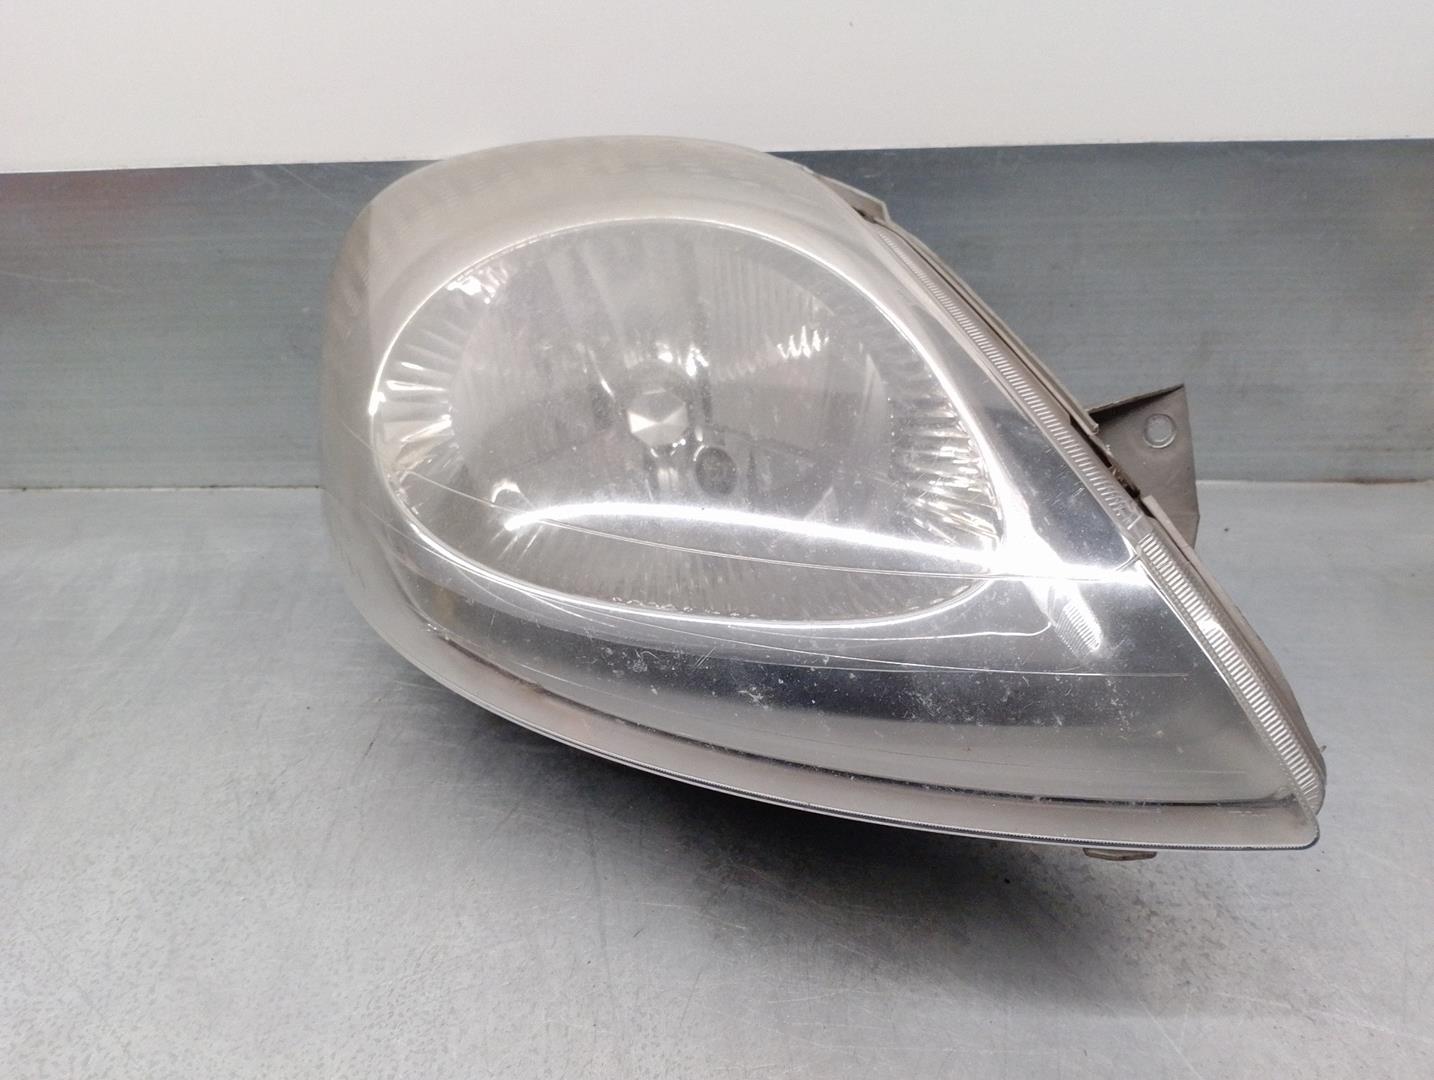 RENAULT A (2002-2006) Front Right Headlight 7700311372, 91165720, 5PUERTAS 24197096